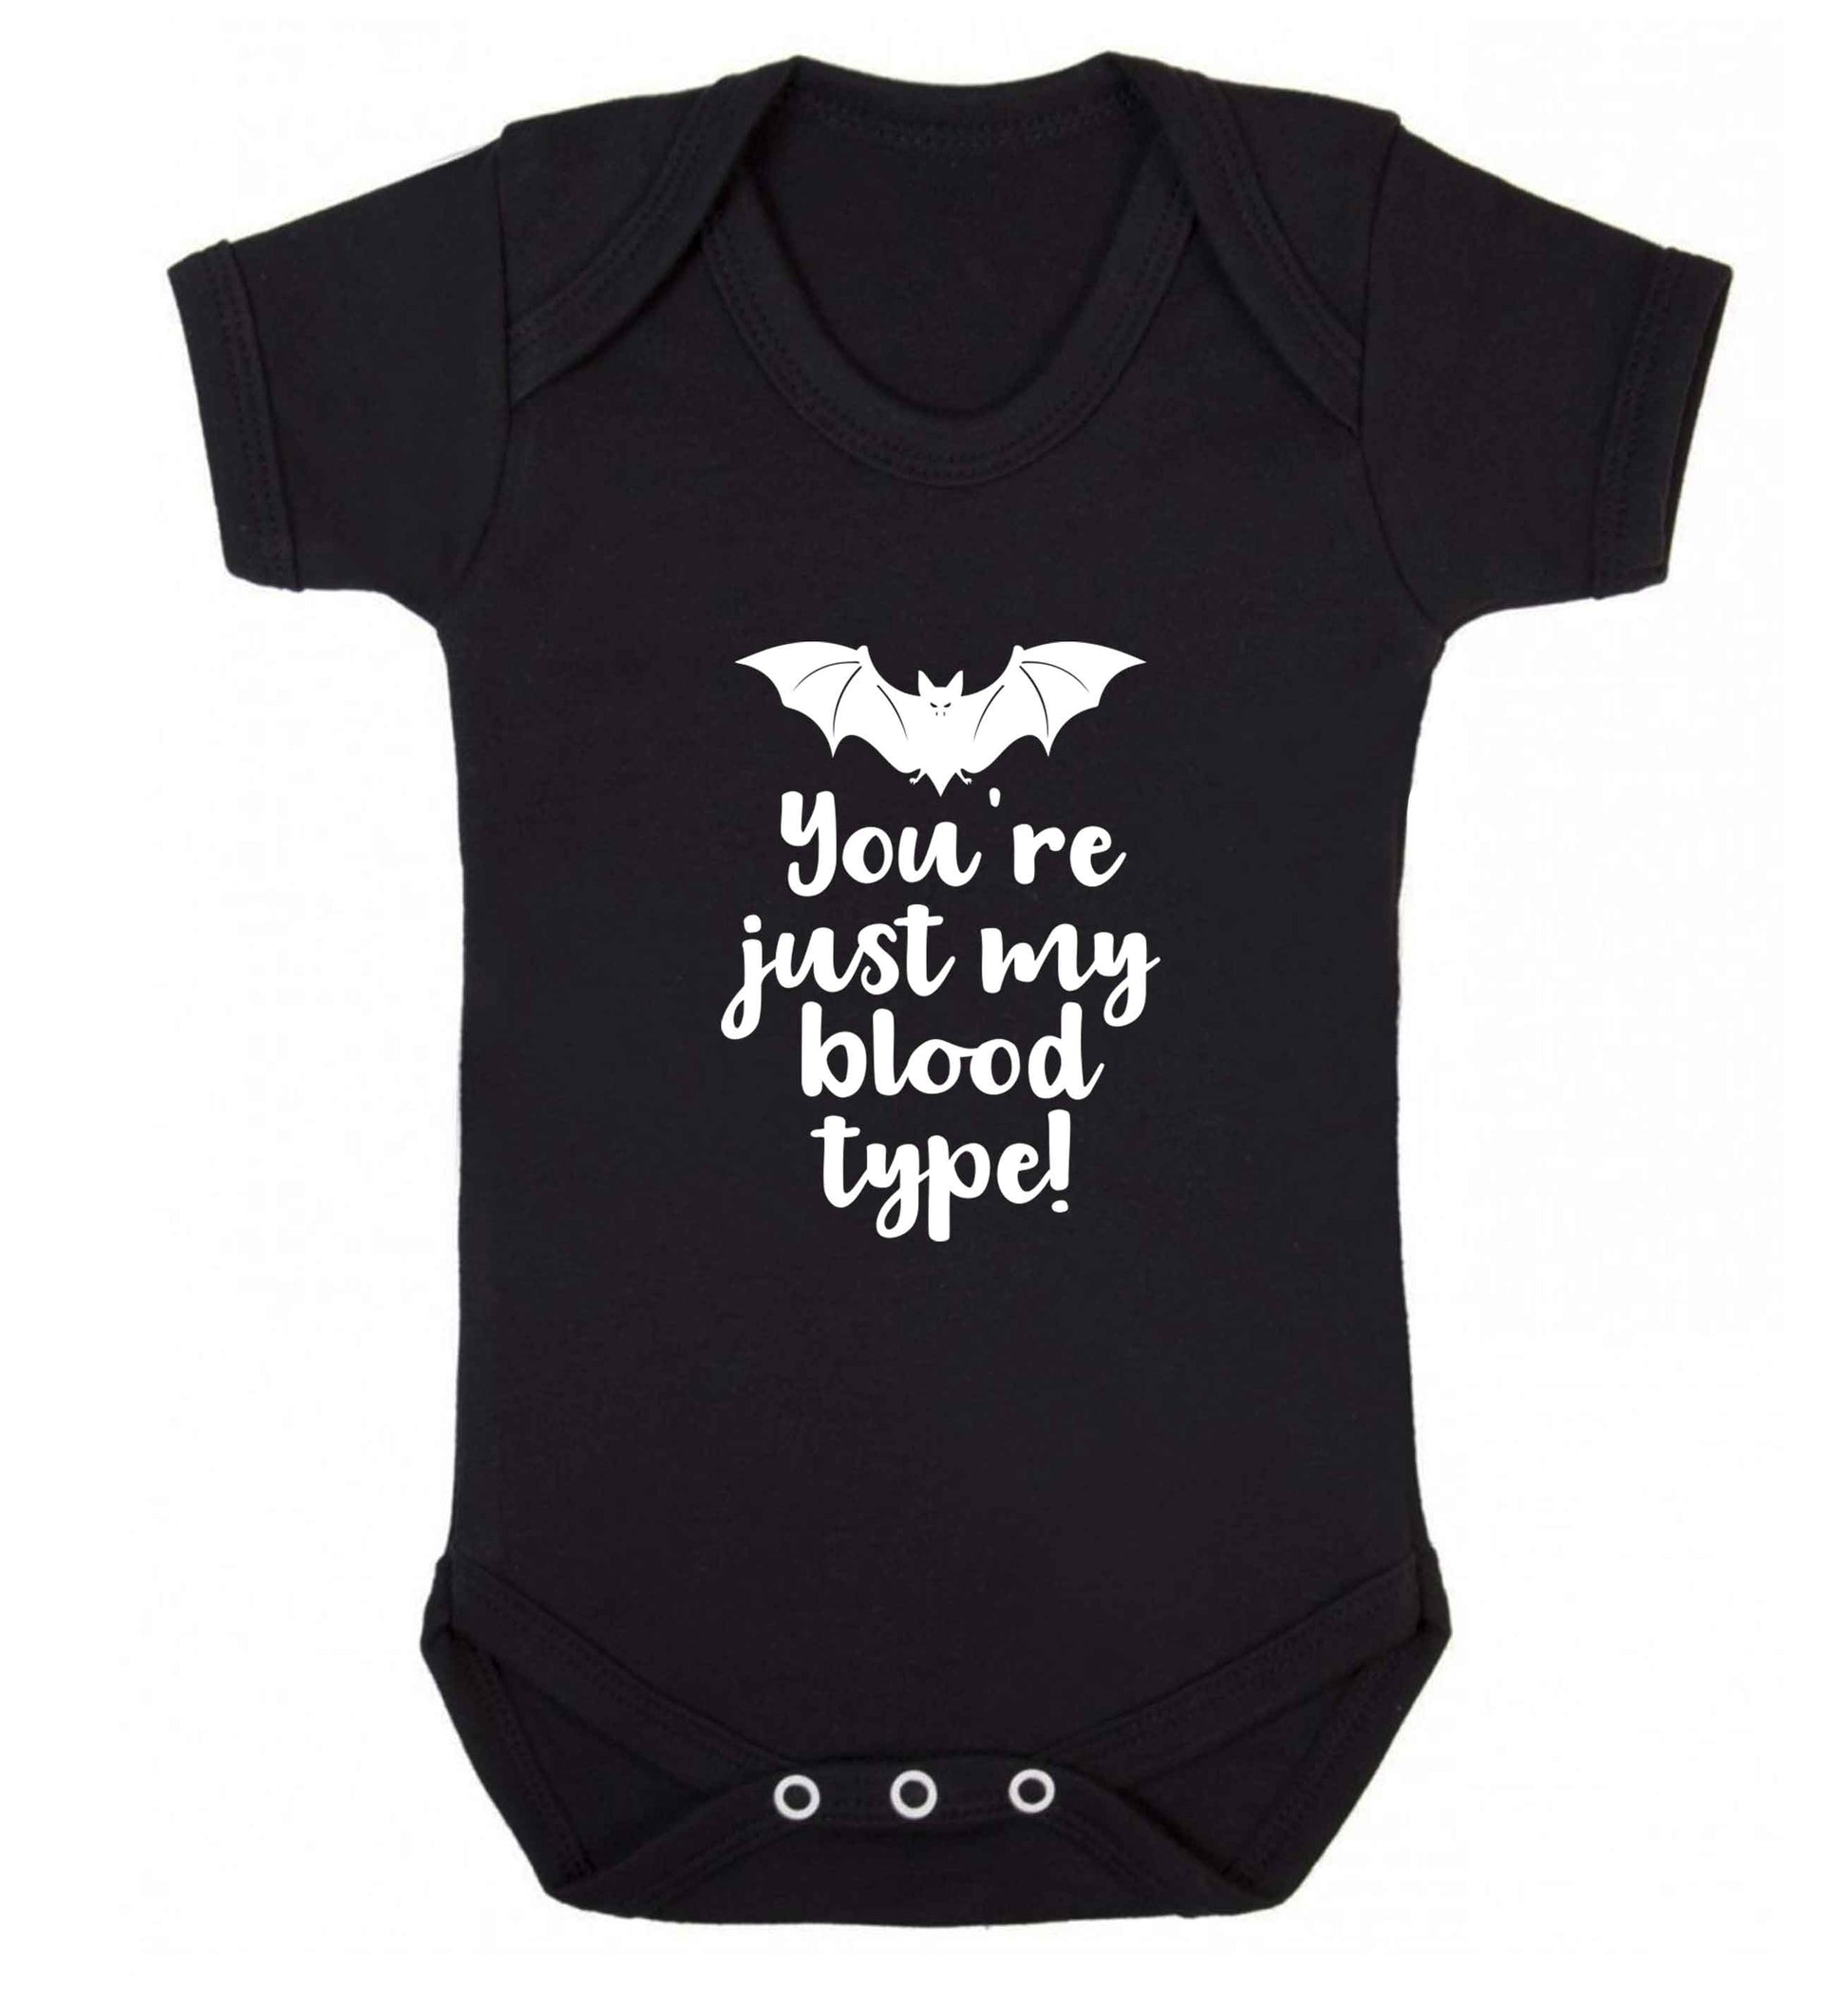 You're just my blood type baby vest black 18-24 months